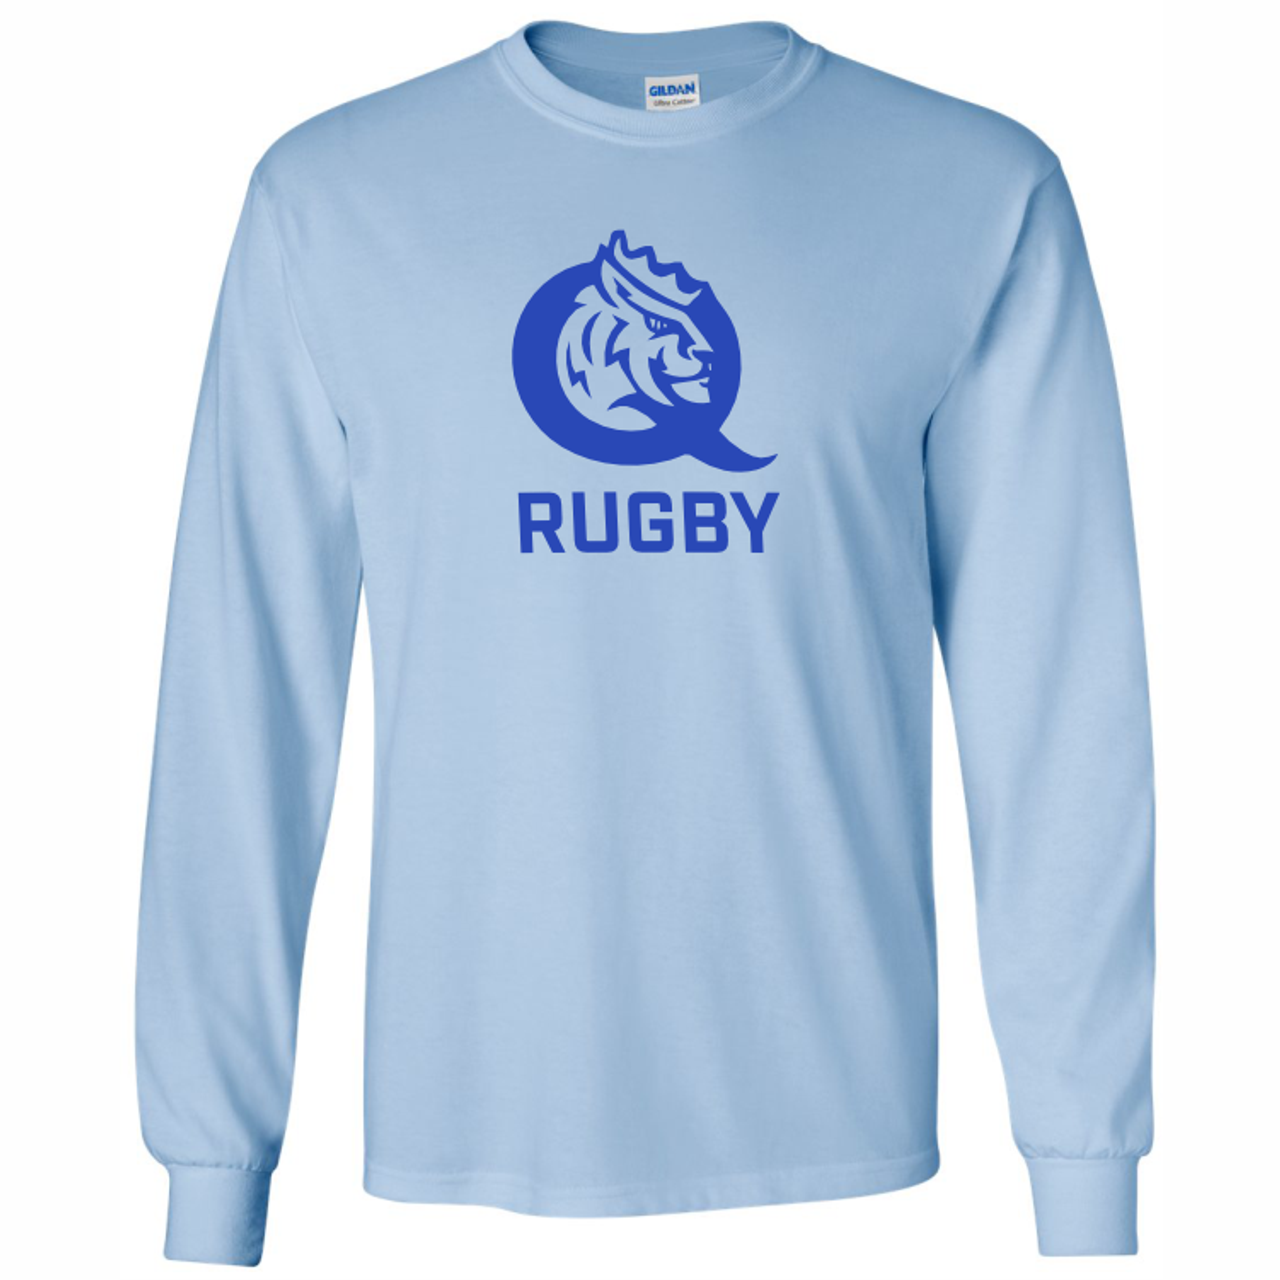 Queens University of Charlotte Rugby 50/50 Tee, Light Blue